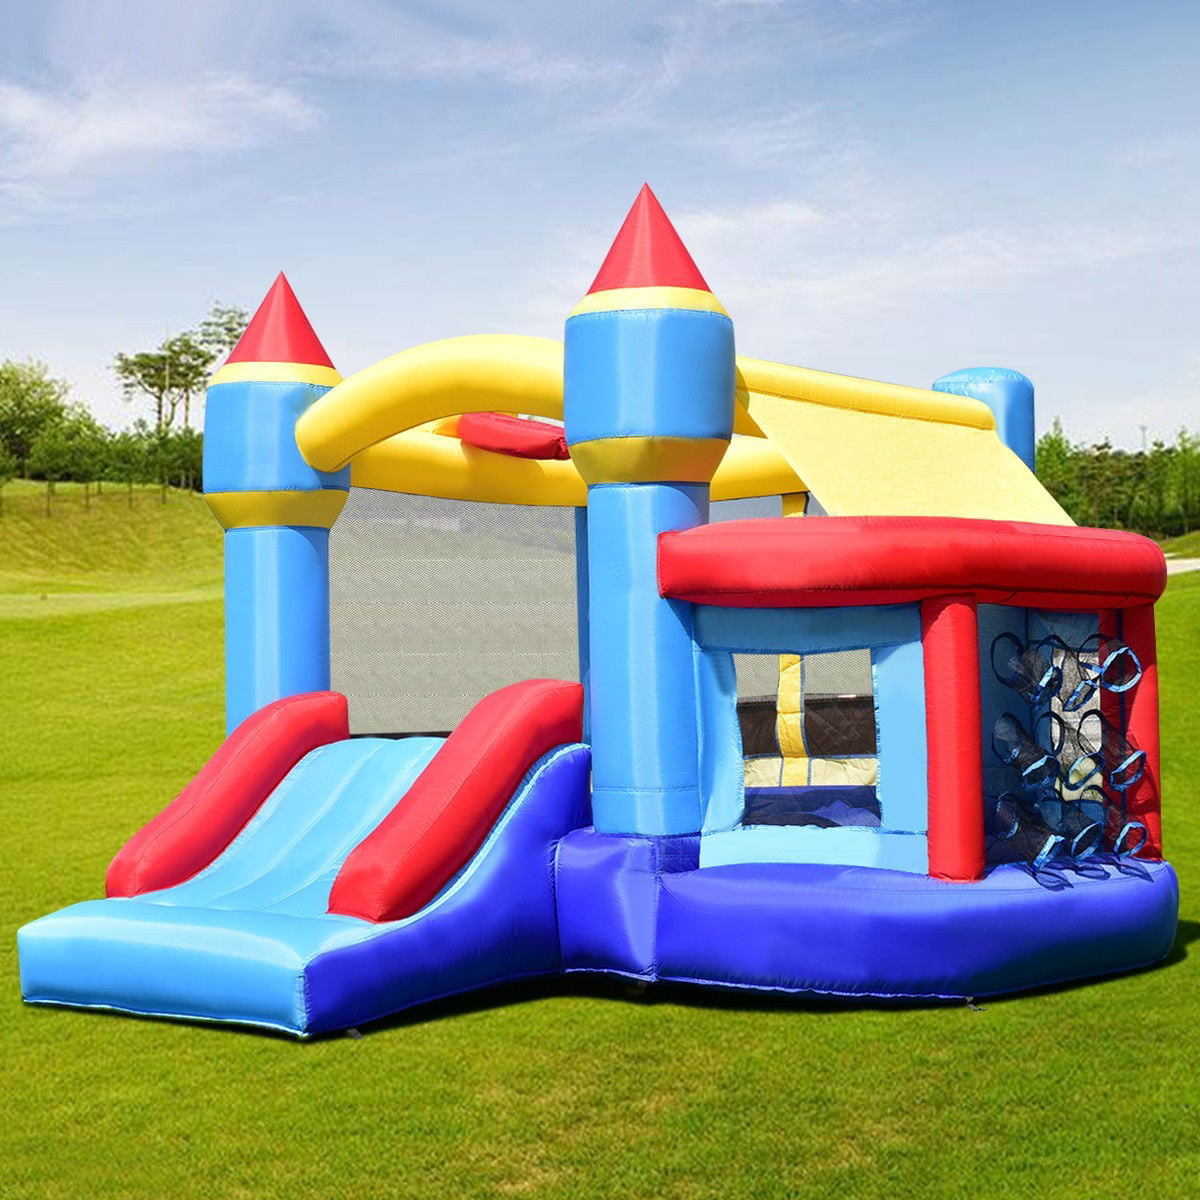 Details about   Inflatable Bounce House Castle Kids Fun Jumper Slide Bouncer w/ Basketball Hoop 